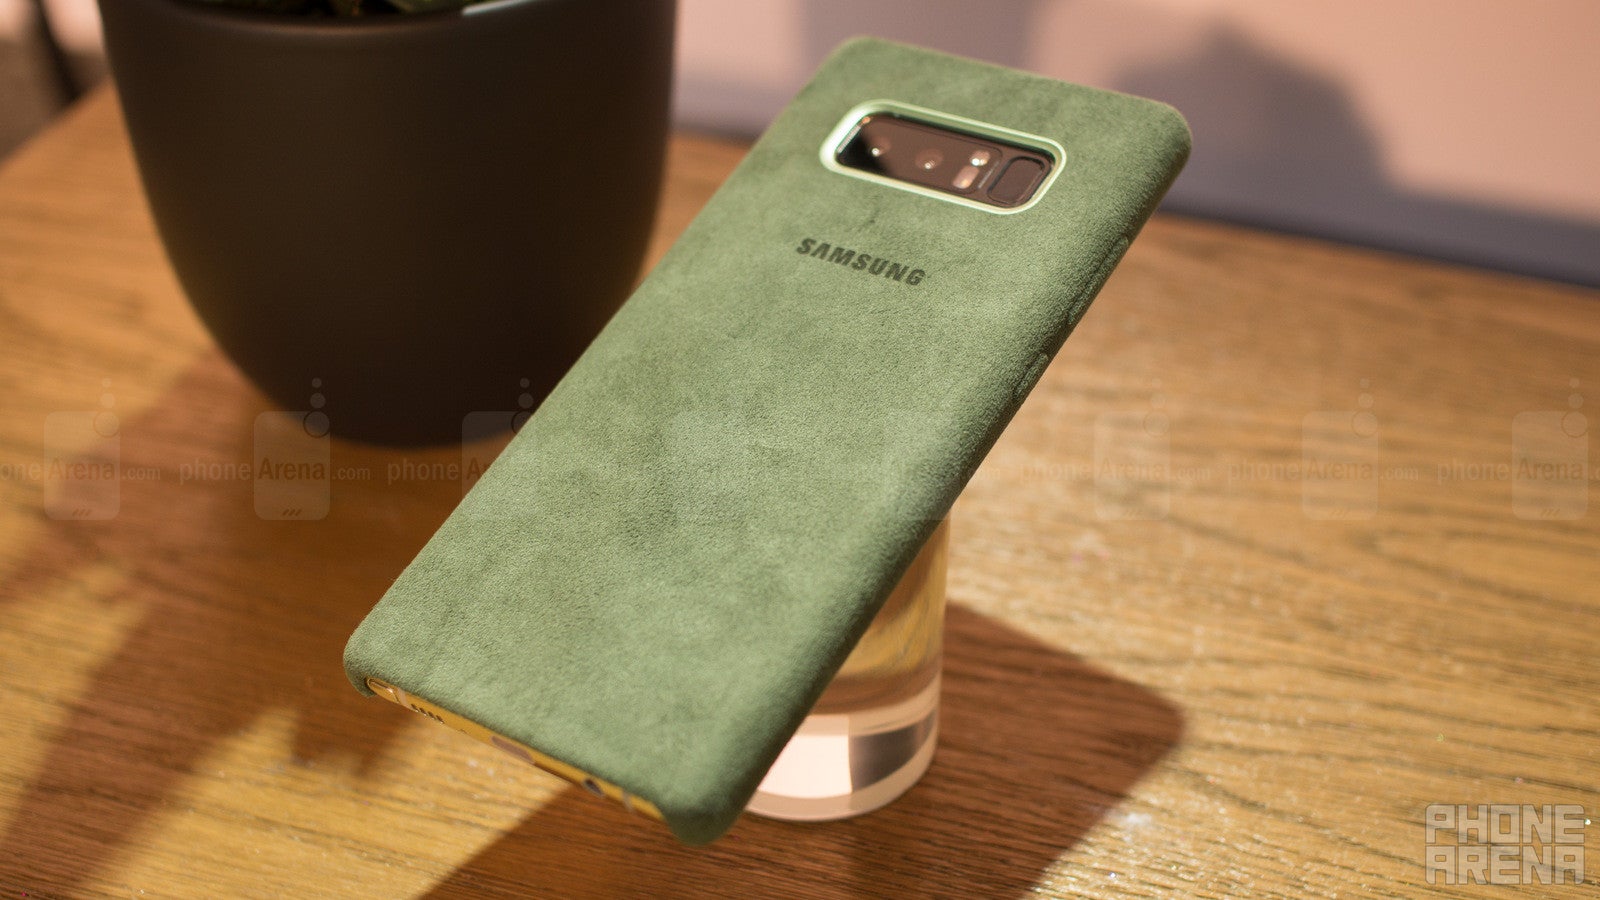 This is the official Galaxy Note 8 Alcantara case and it&#039;s... different